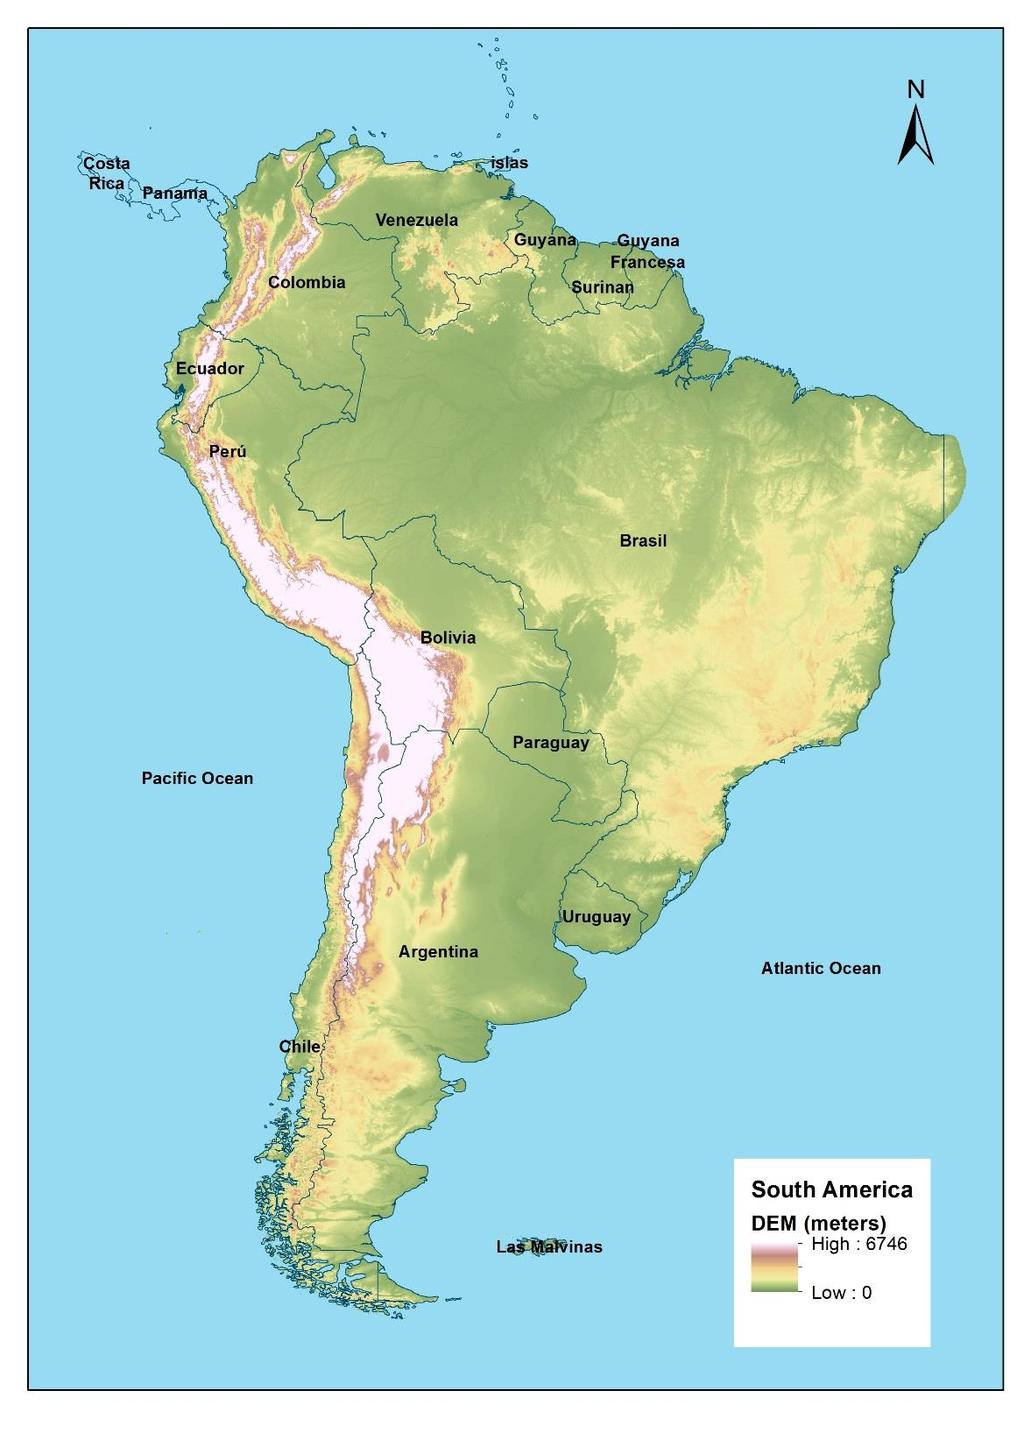 South America: Andean region South America is a region with a marked diversity in cultural, social, demographic, and